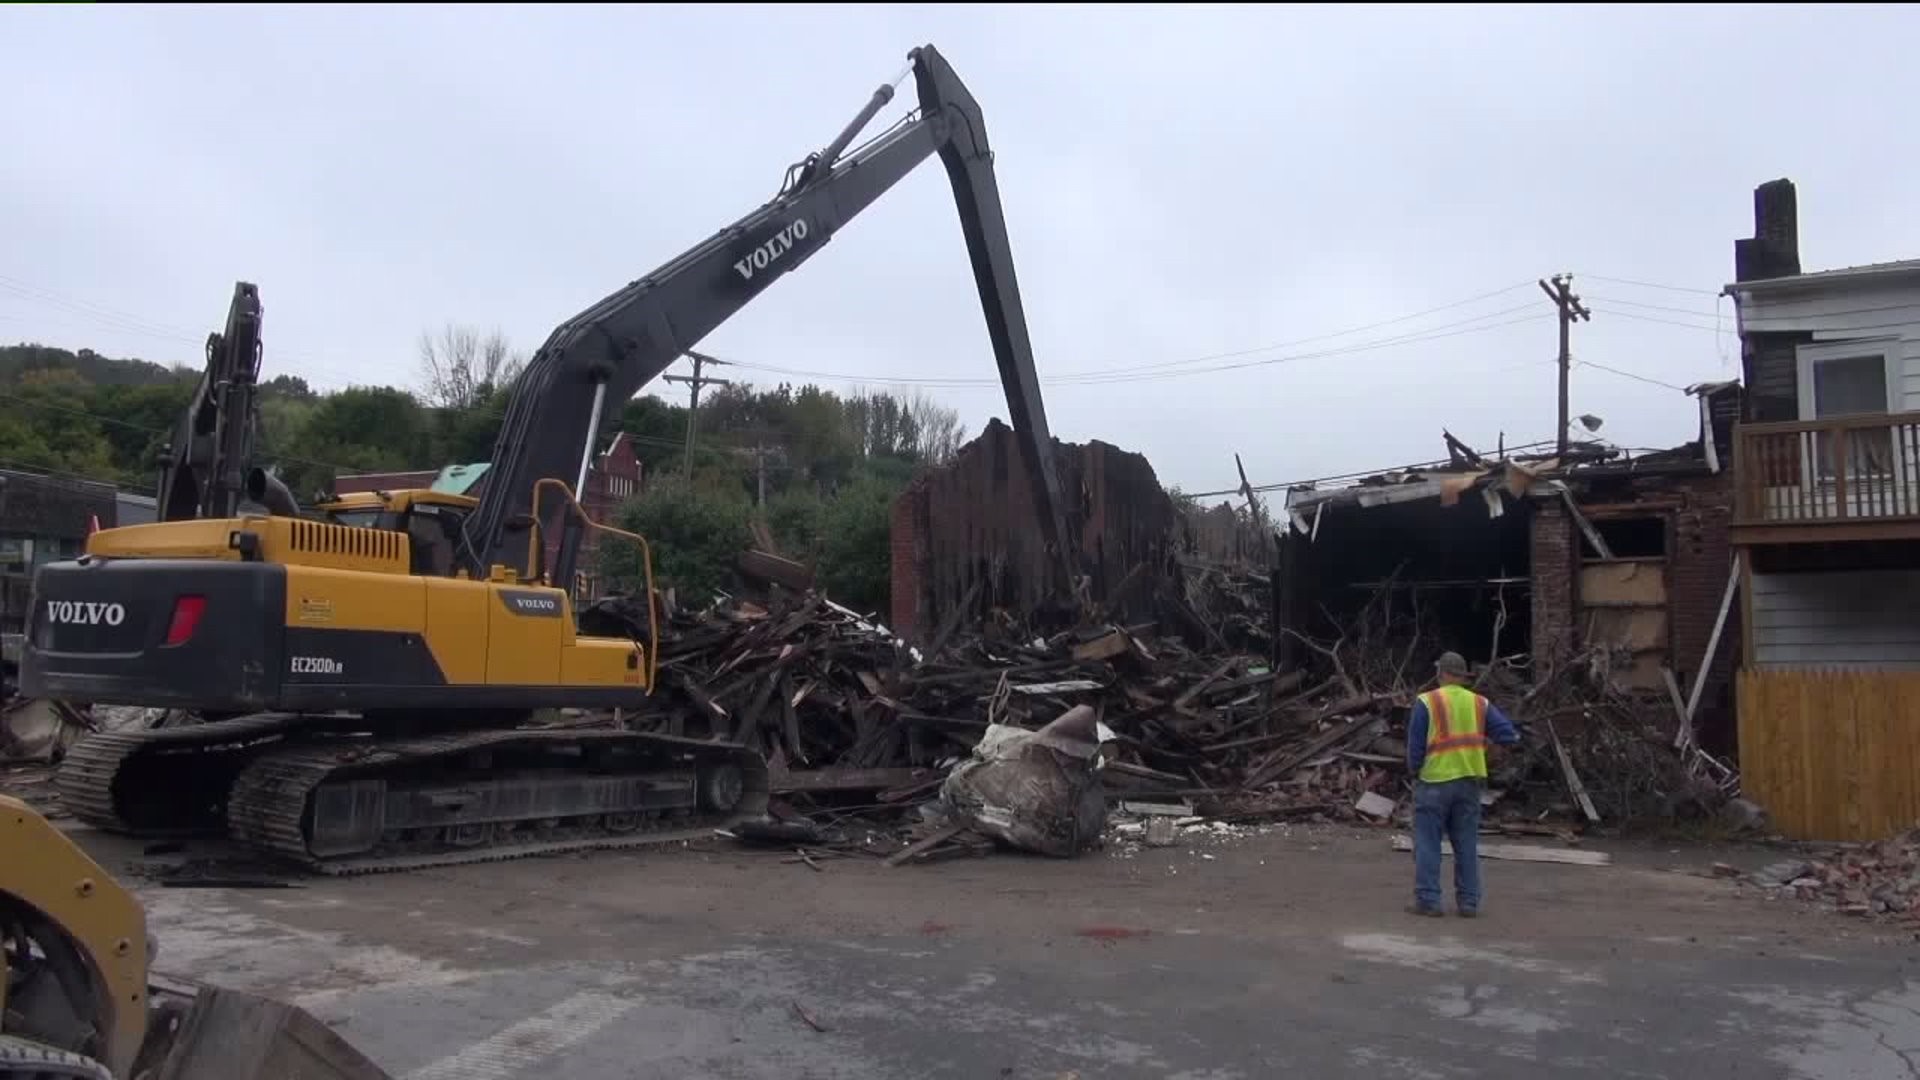 Piece of History in Susquehanna Coming Down